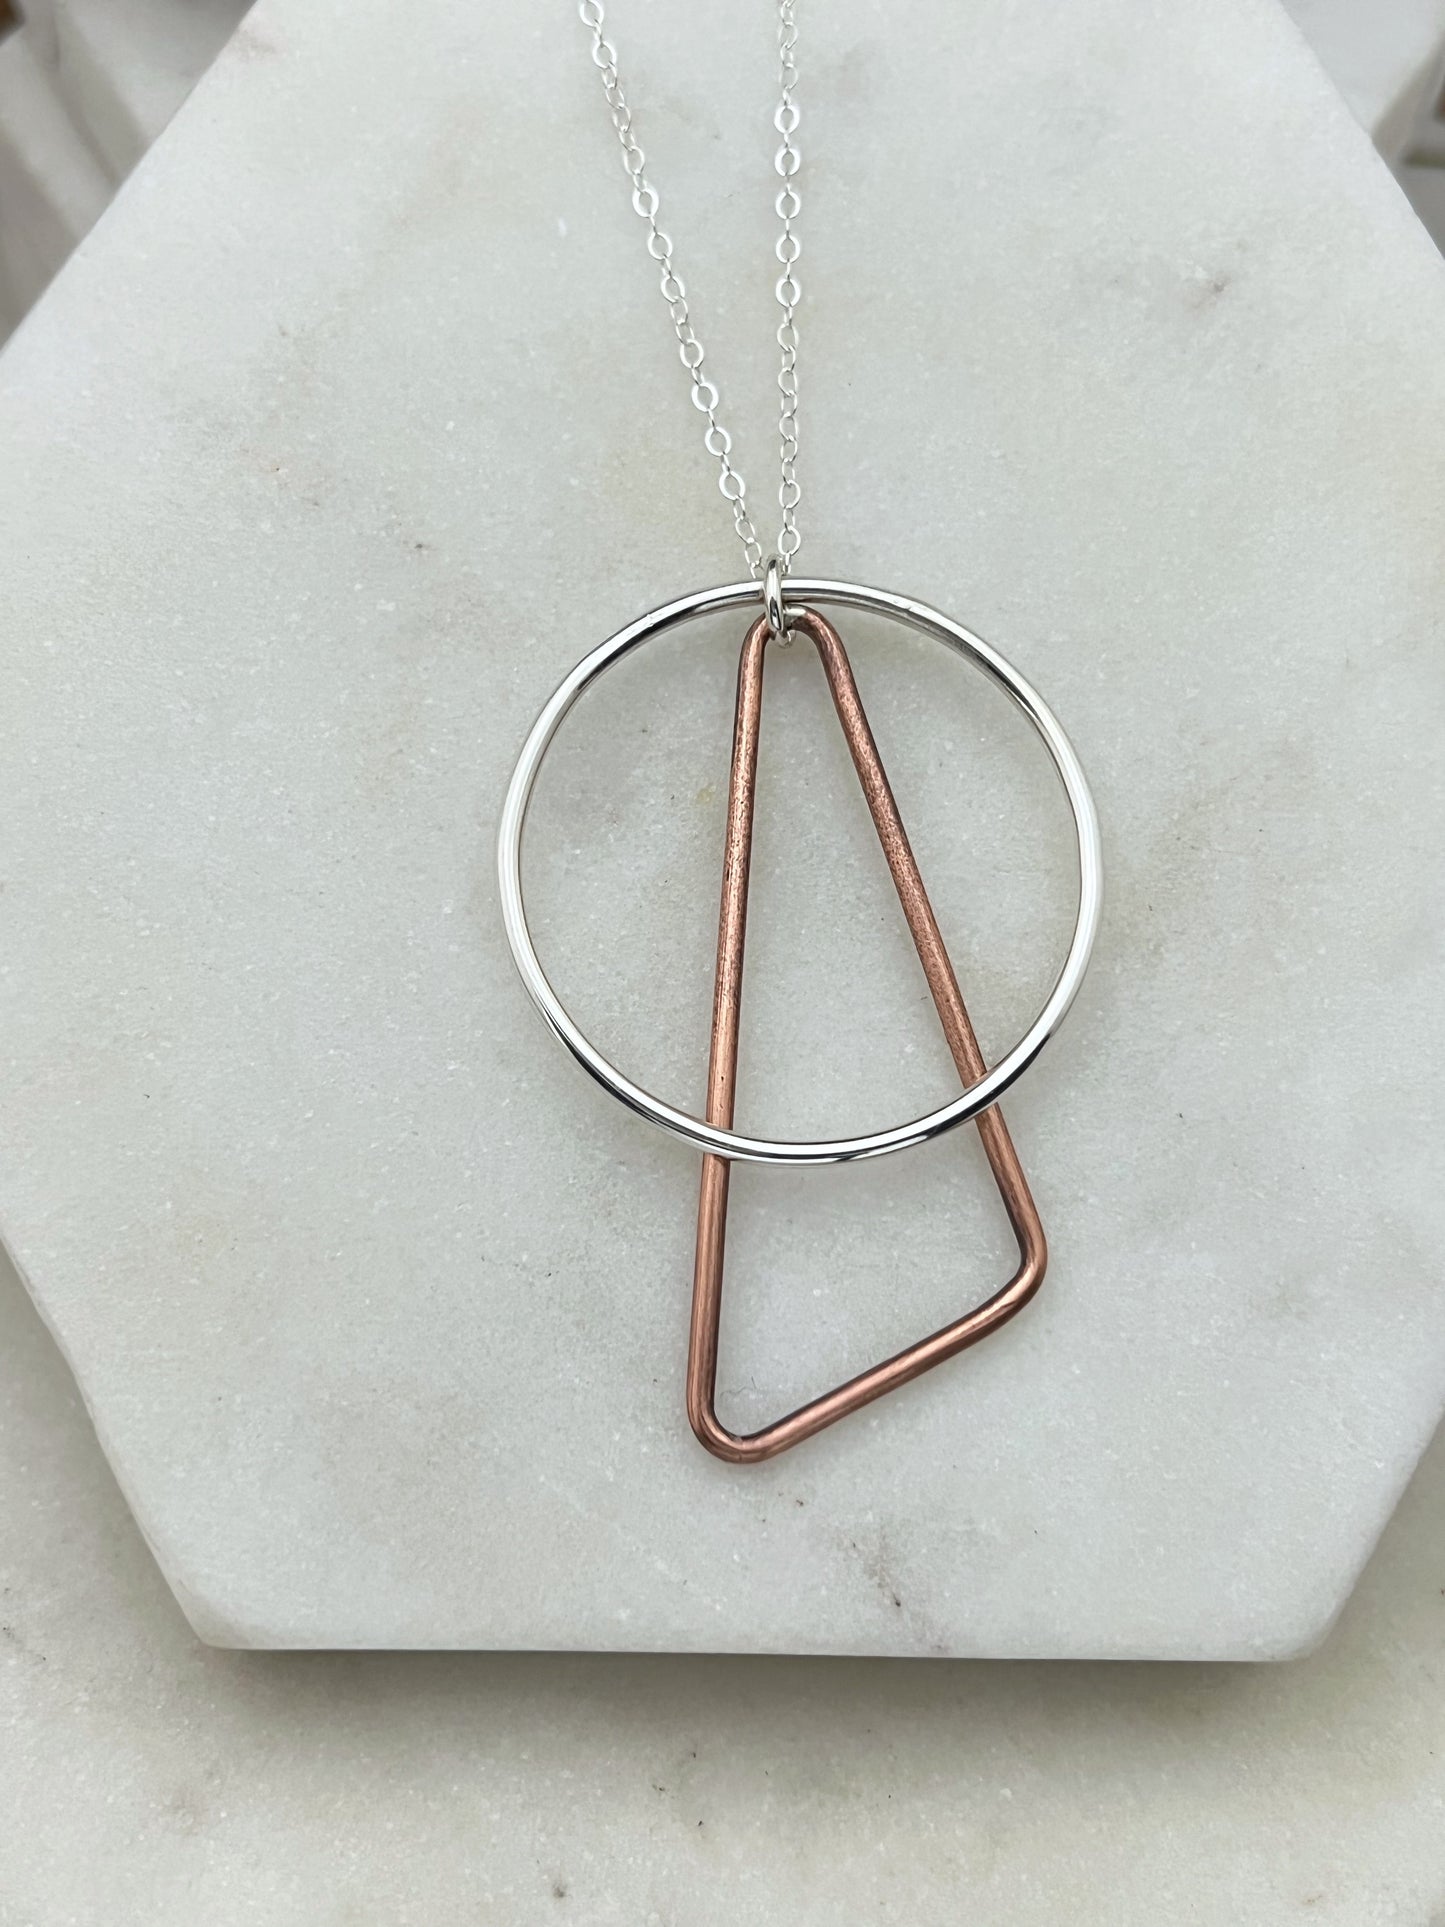 Long sterling silver and copper mixed metal necklace